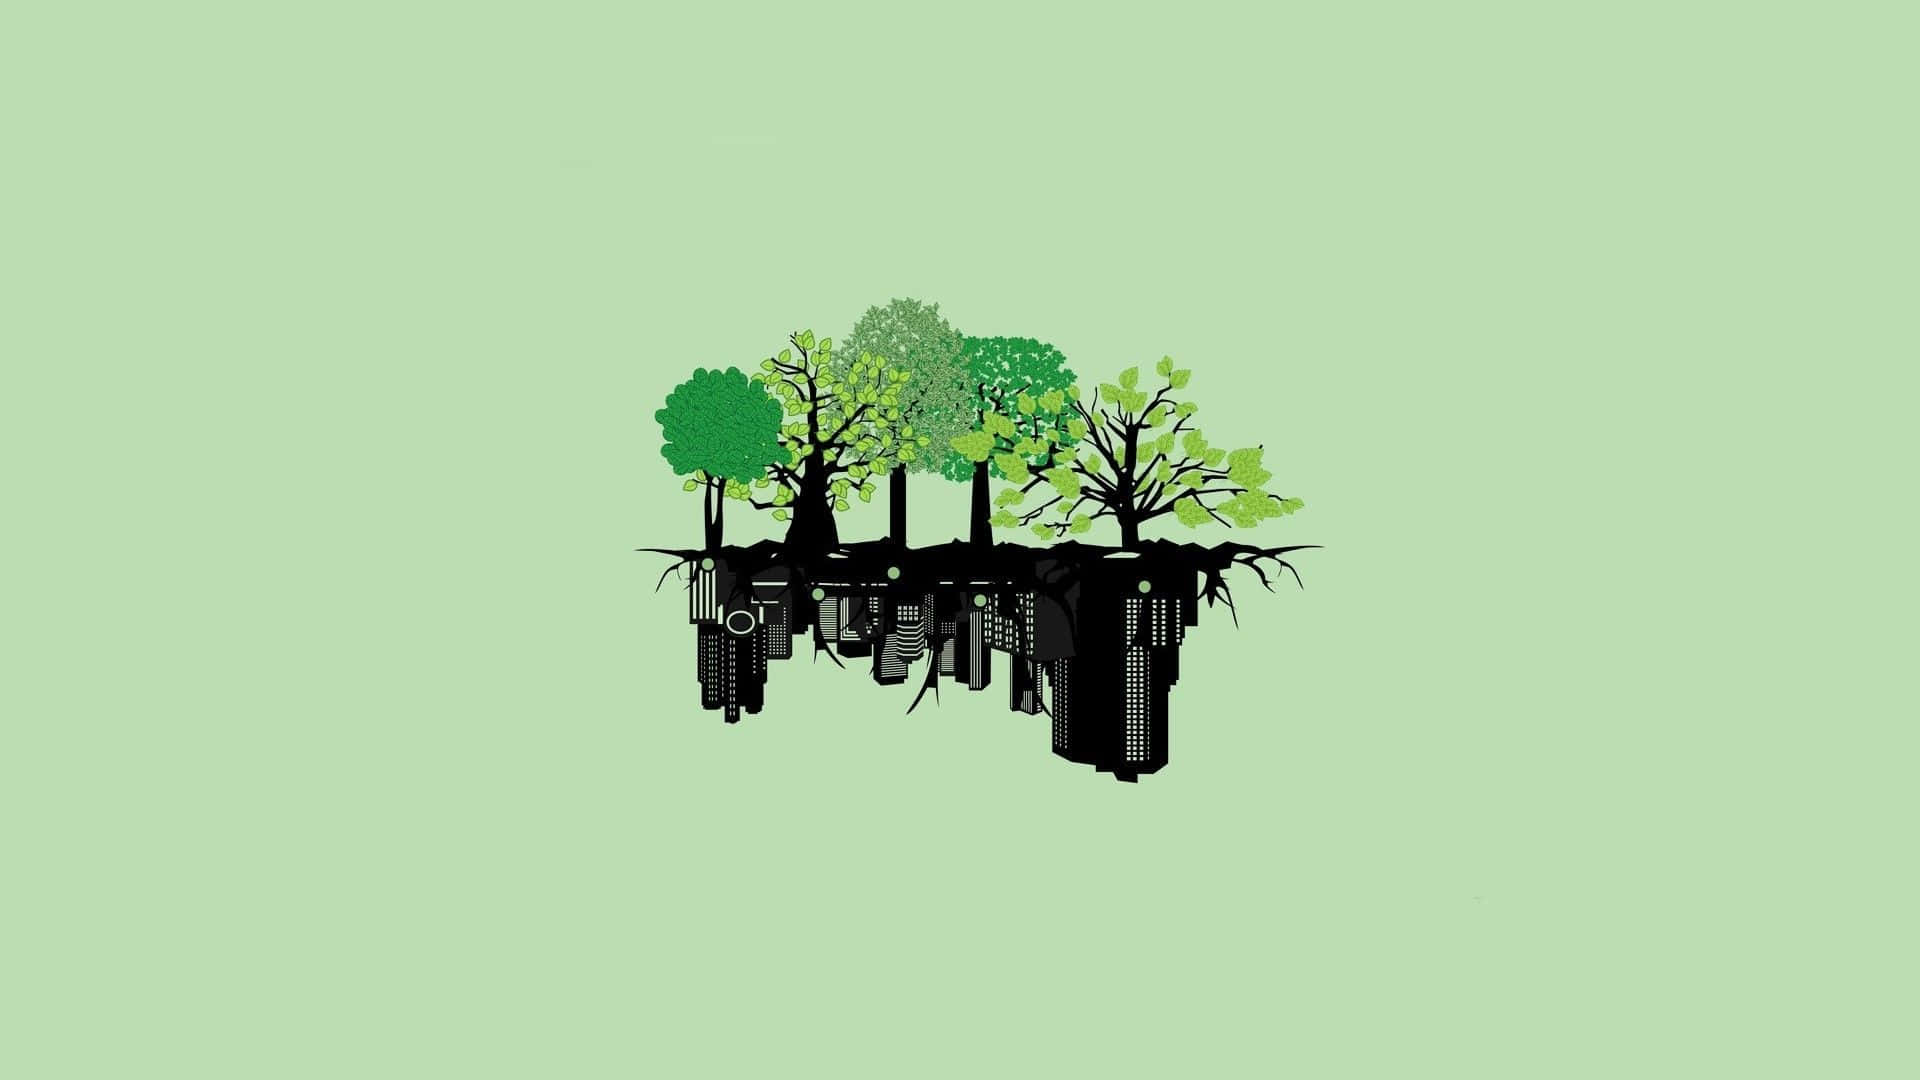 1920 X 1080 Minimalist Trees With Buildings Wallpaper